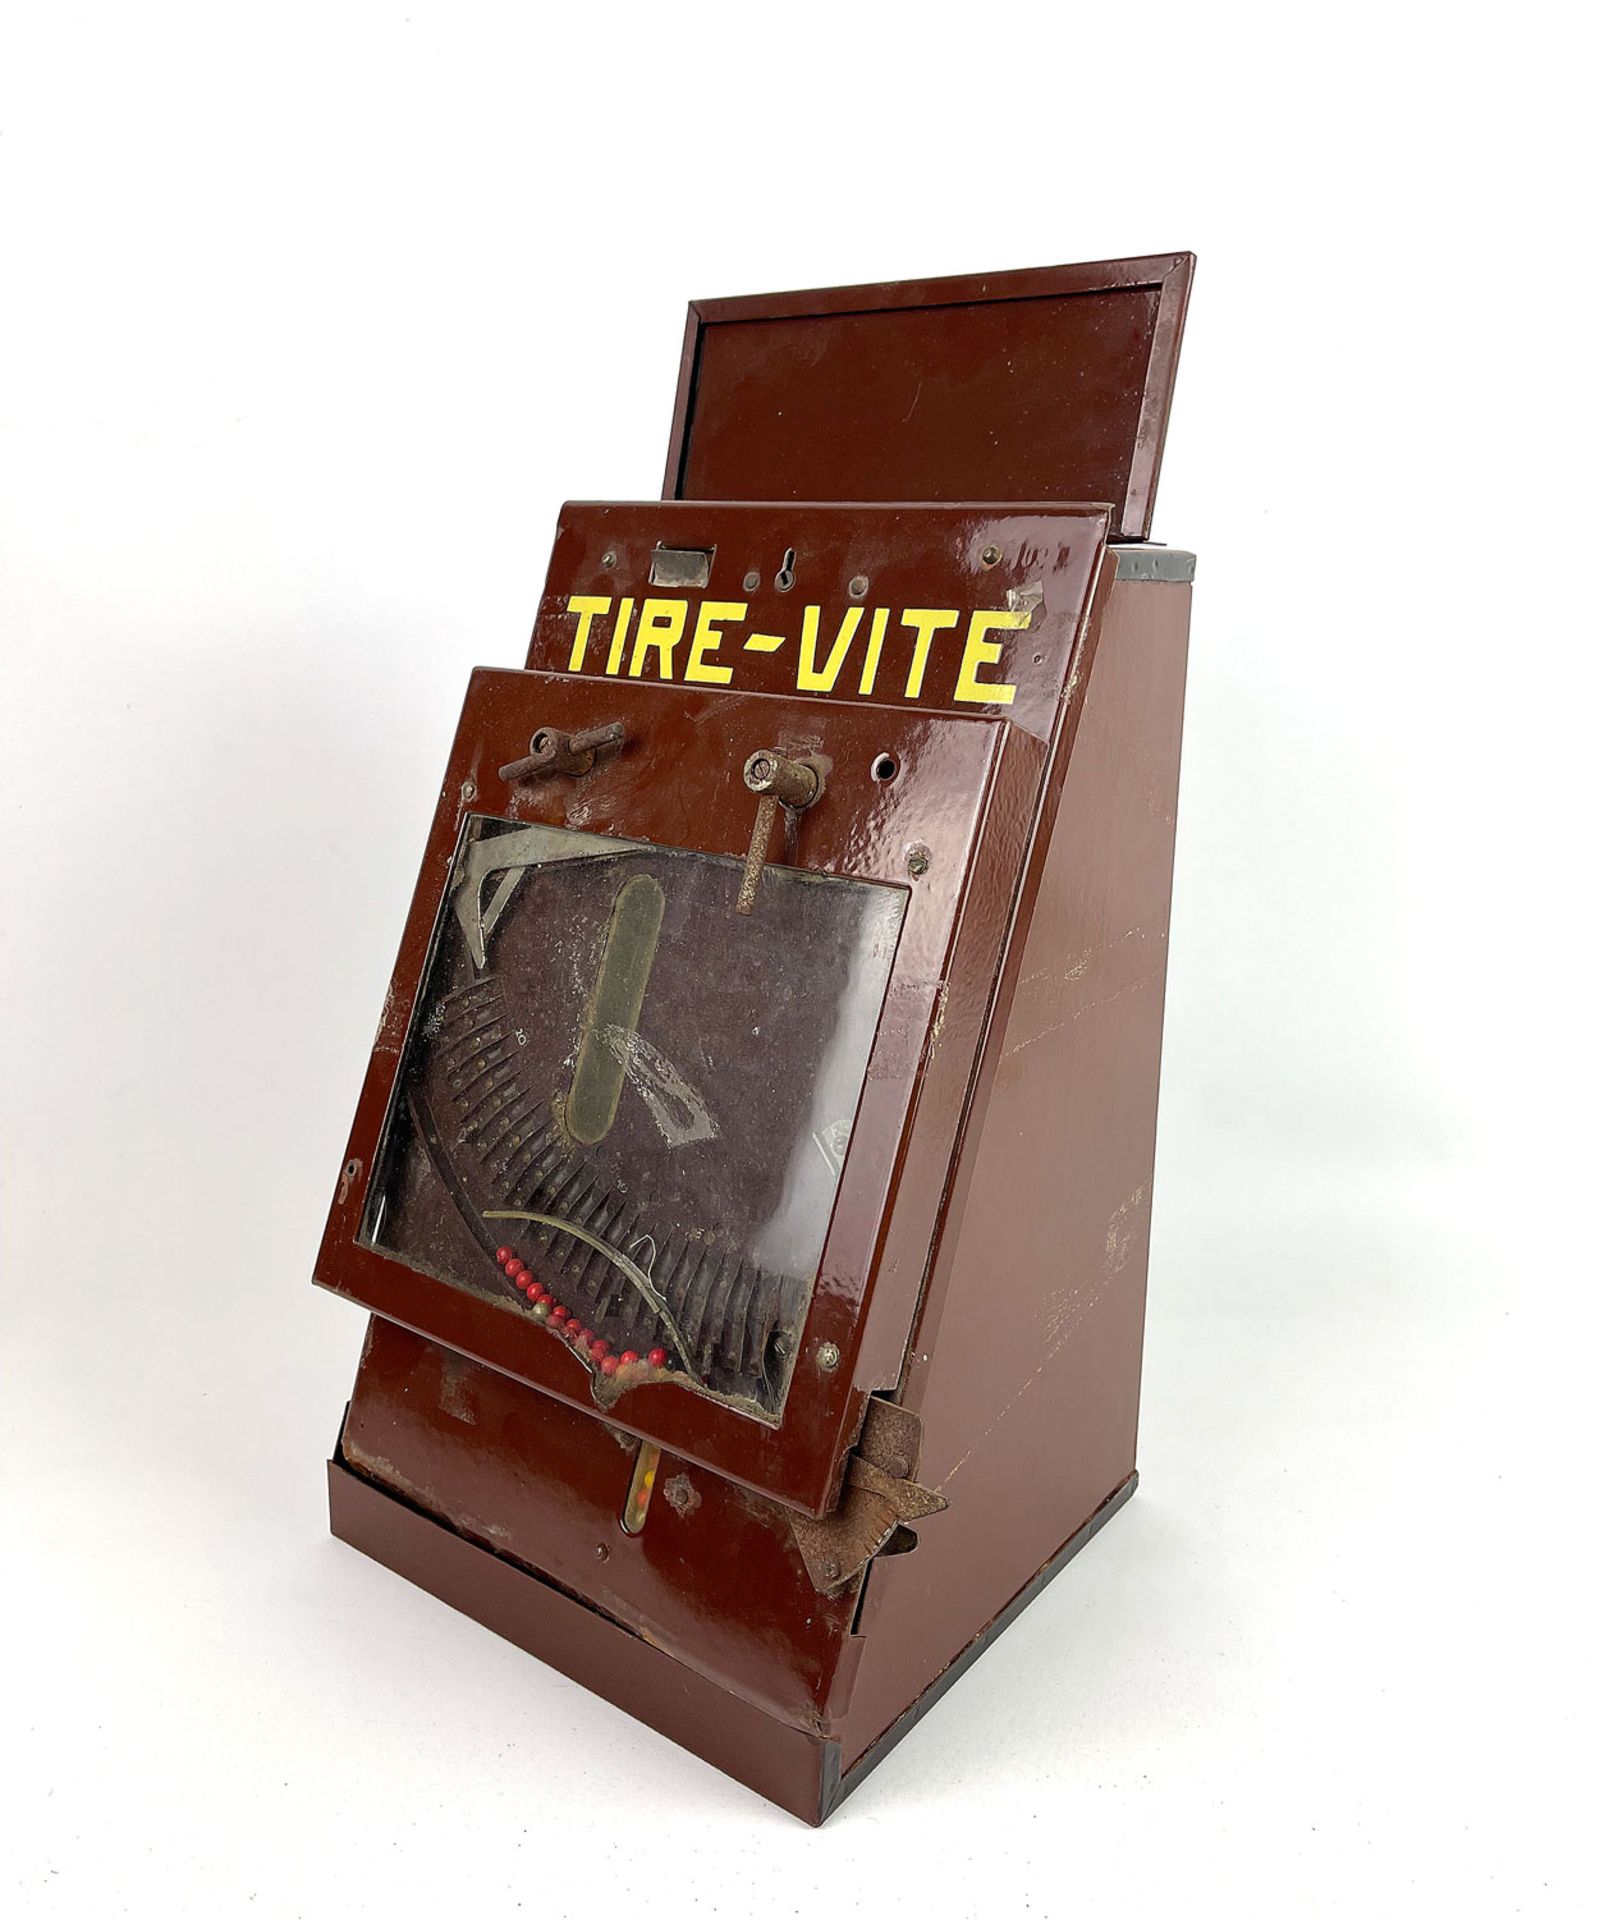 Tire-Vite French Coin-Op Arcade Game ca. 1935